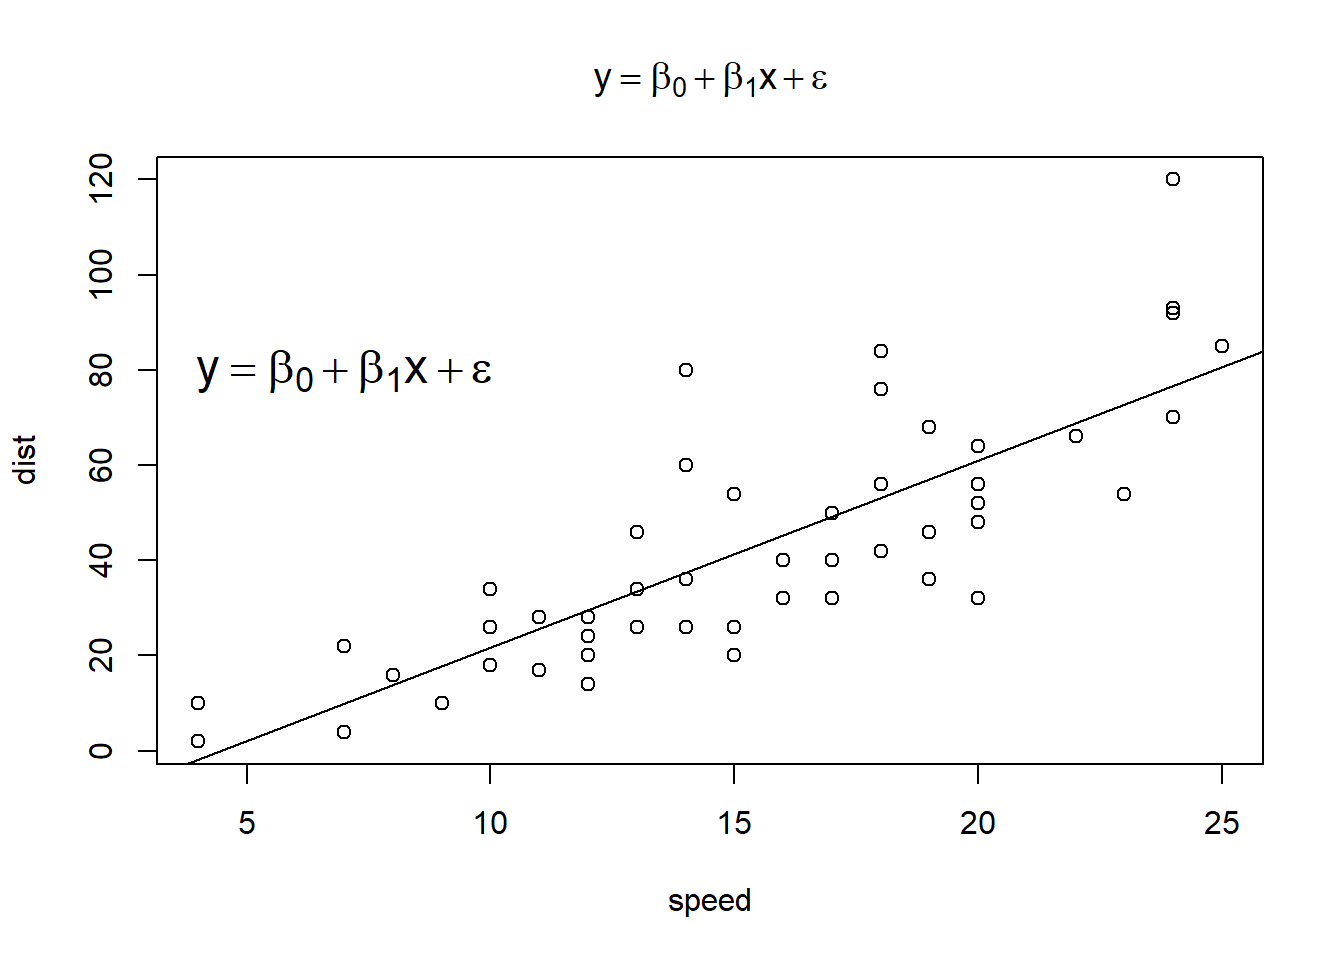 One scatterplot with line